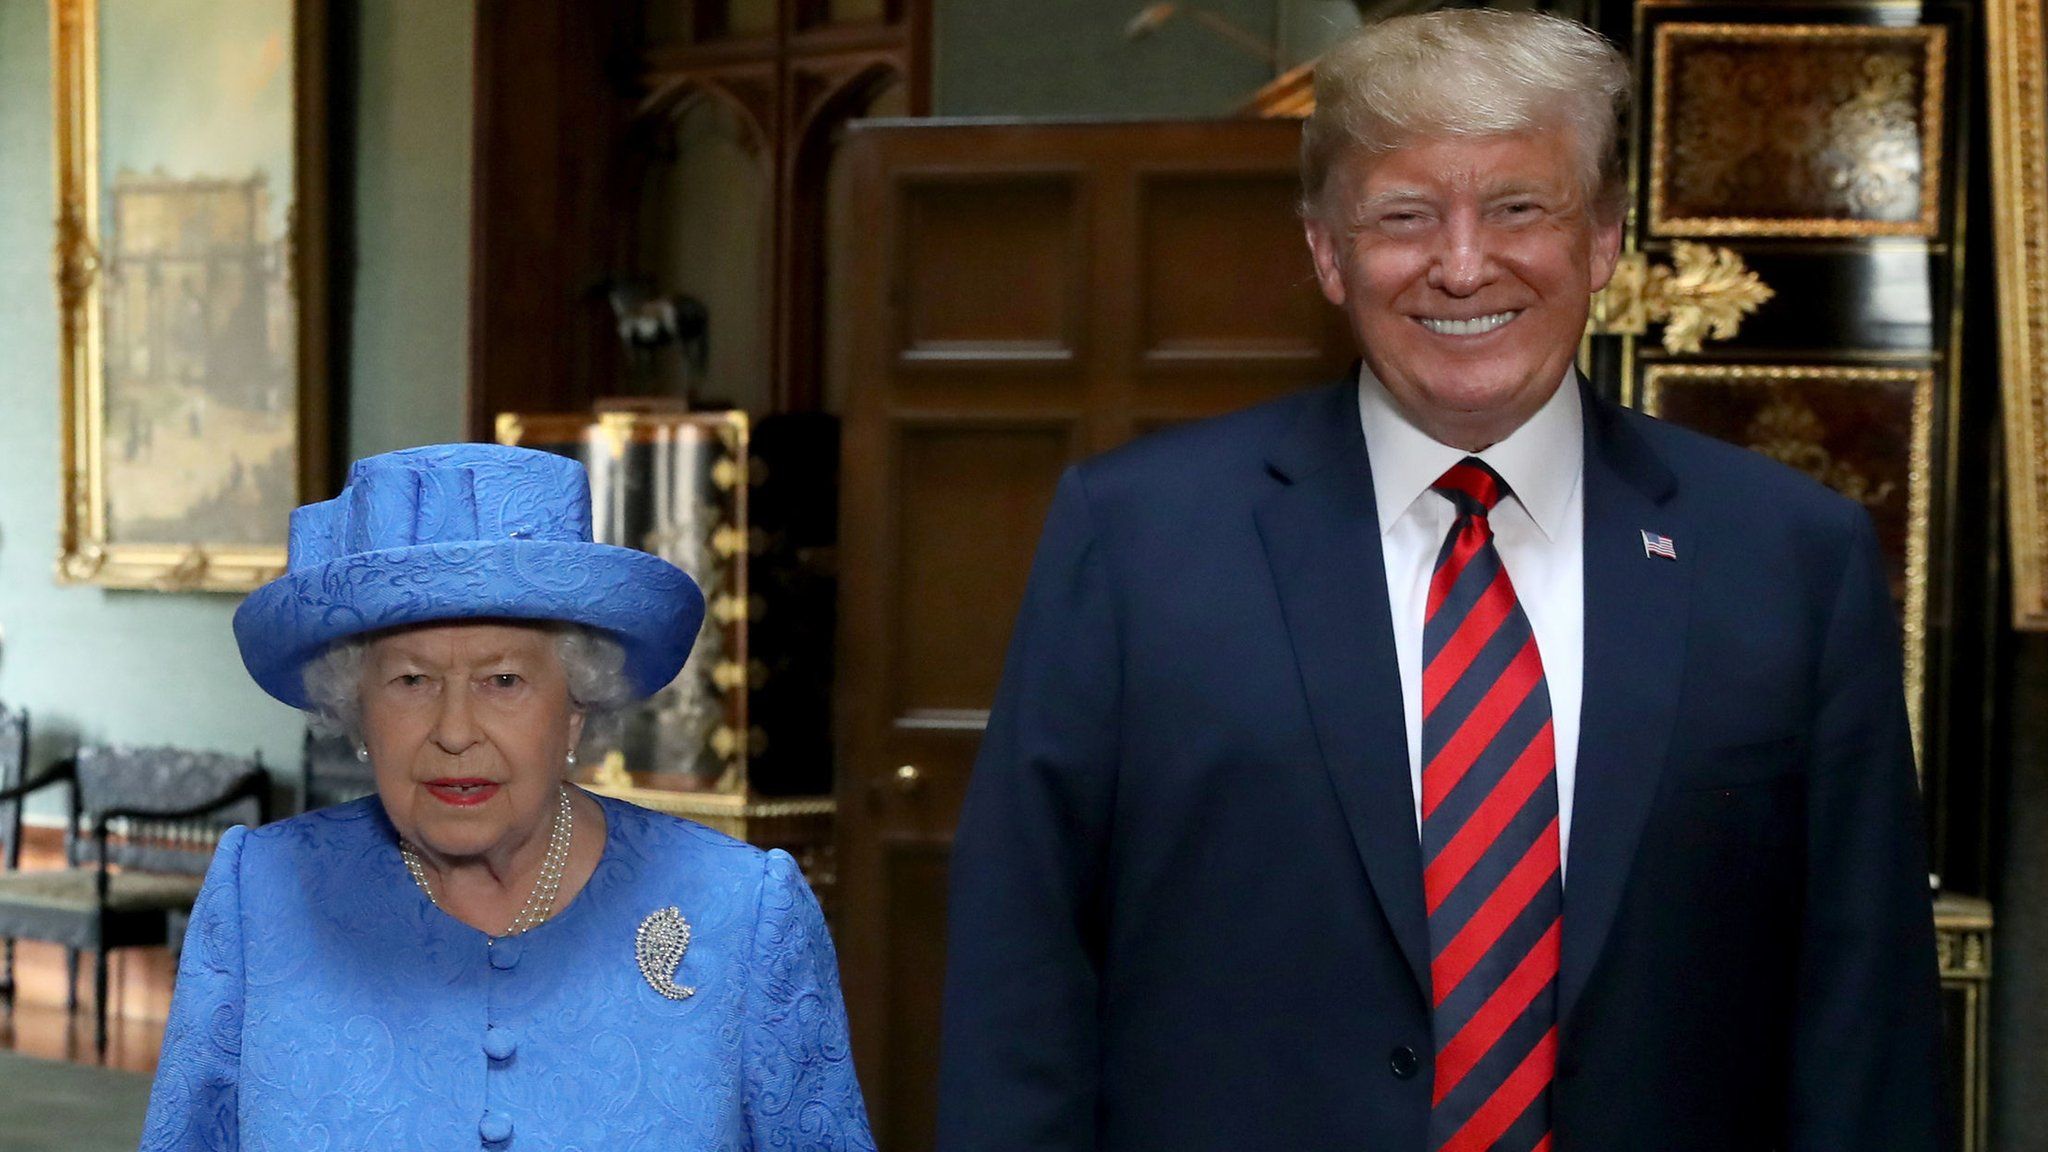 The Queen and President Trump